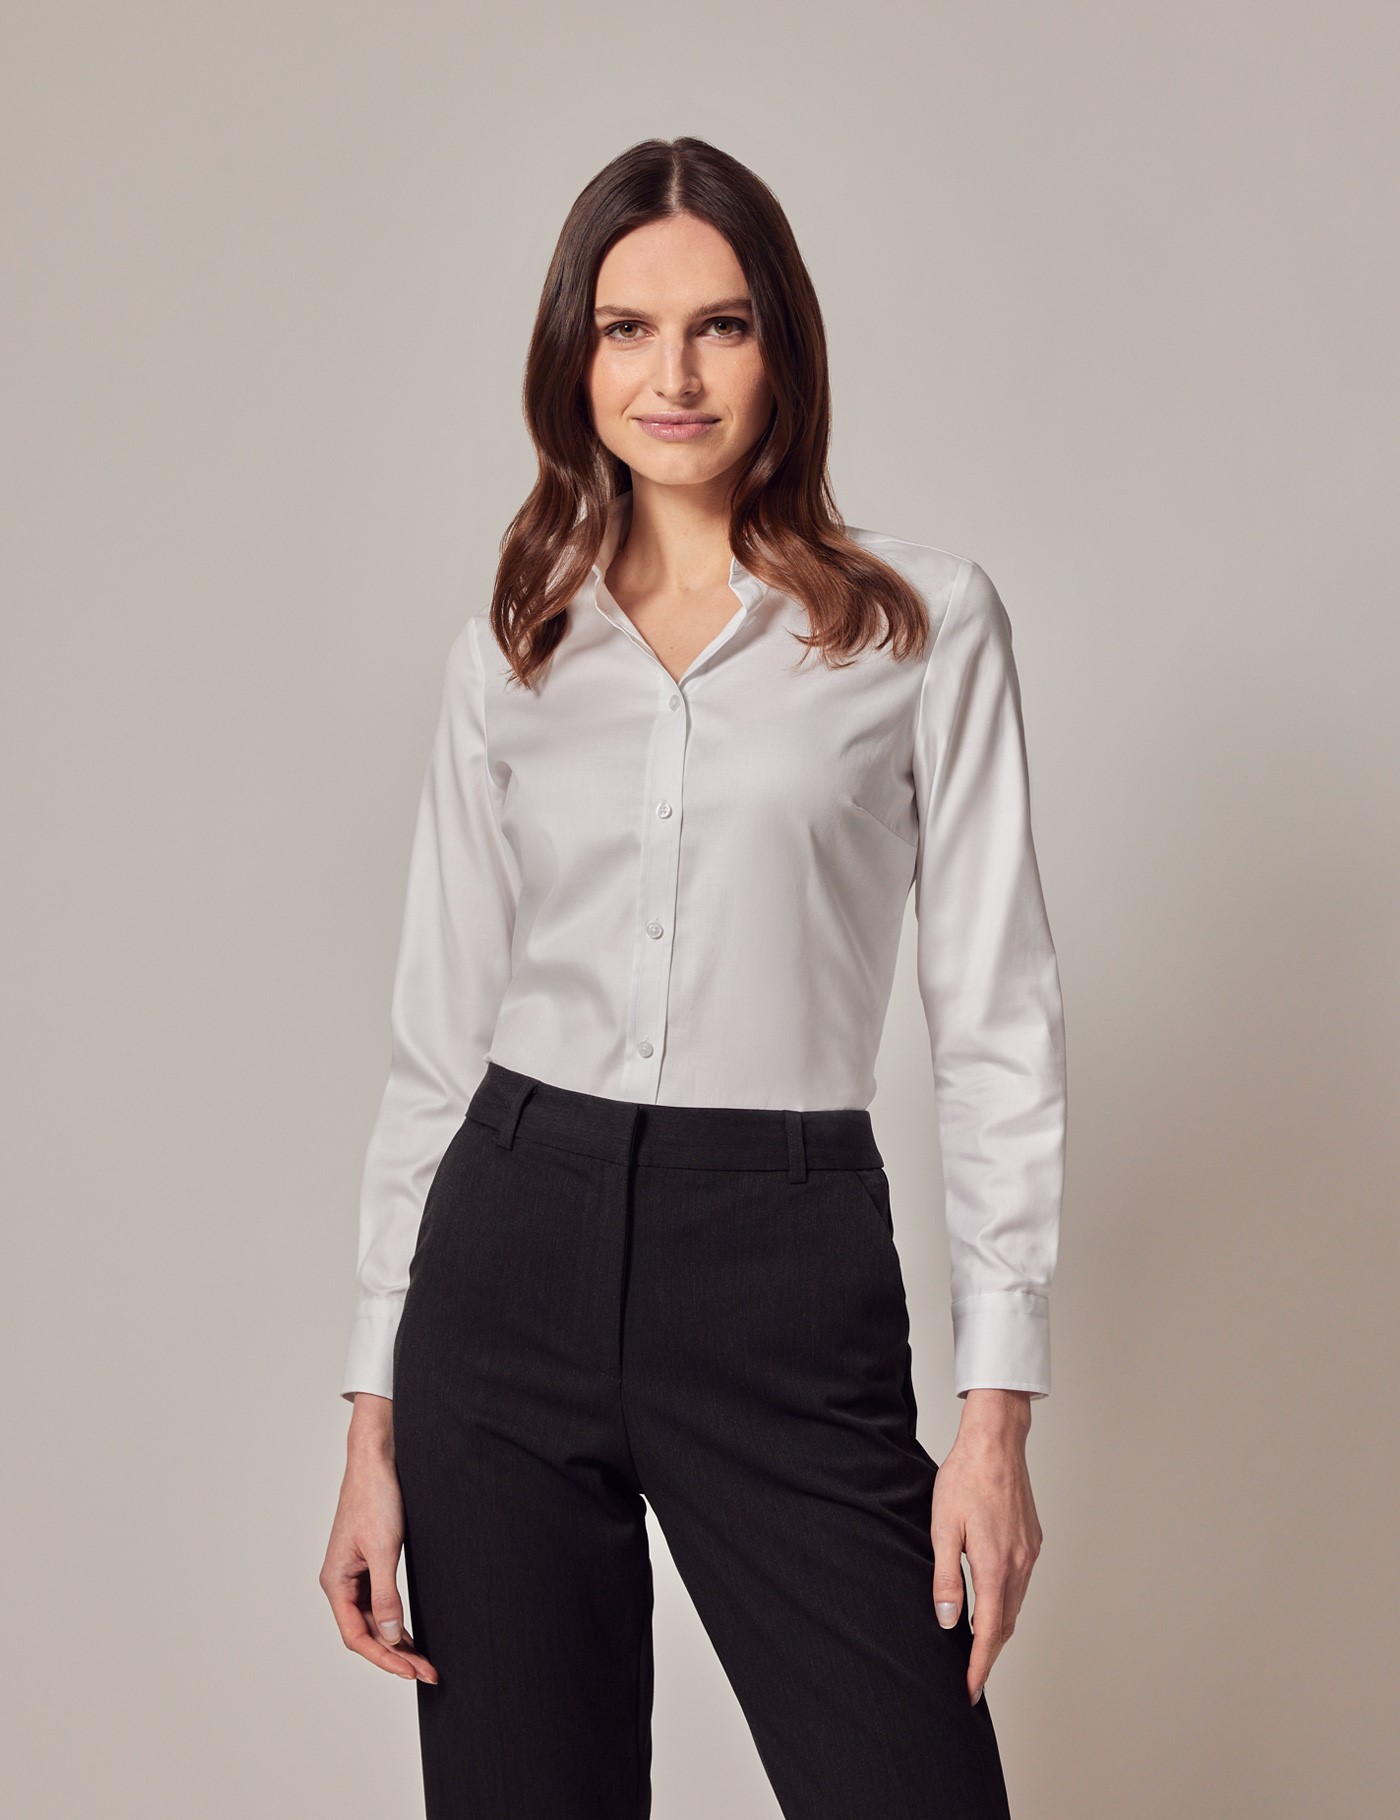 Women's Executive White Twill Semi Fitted Shirt